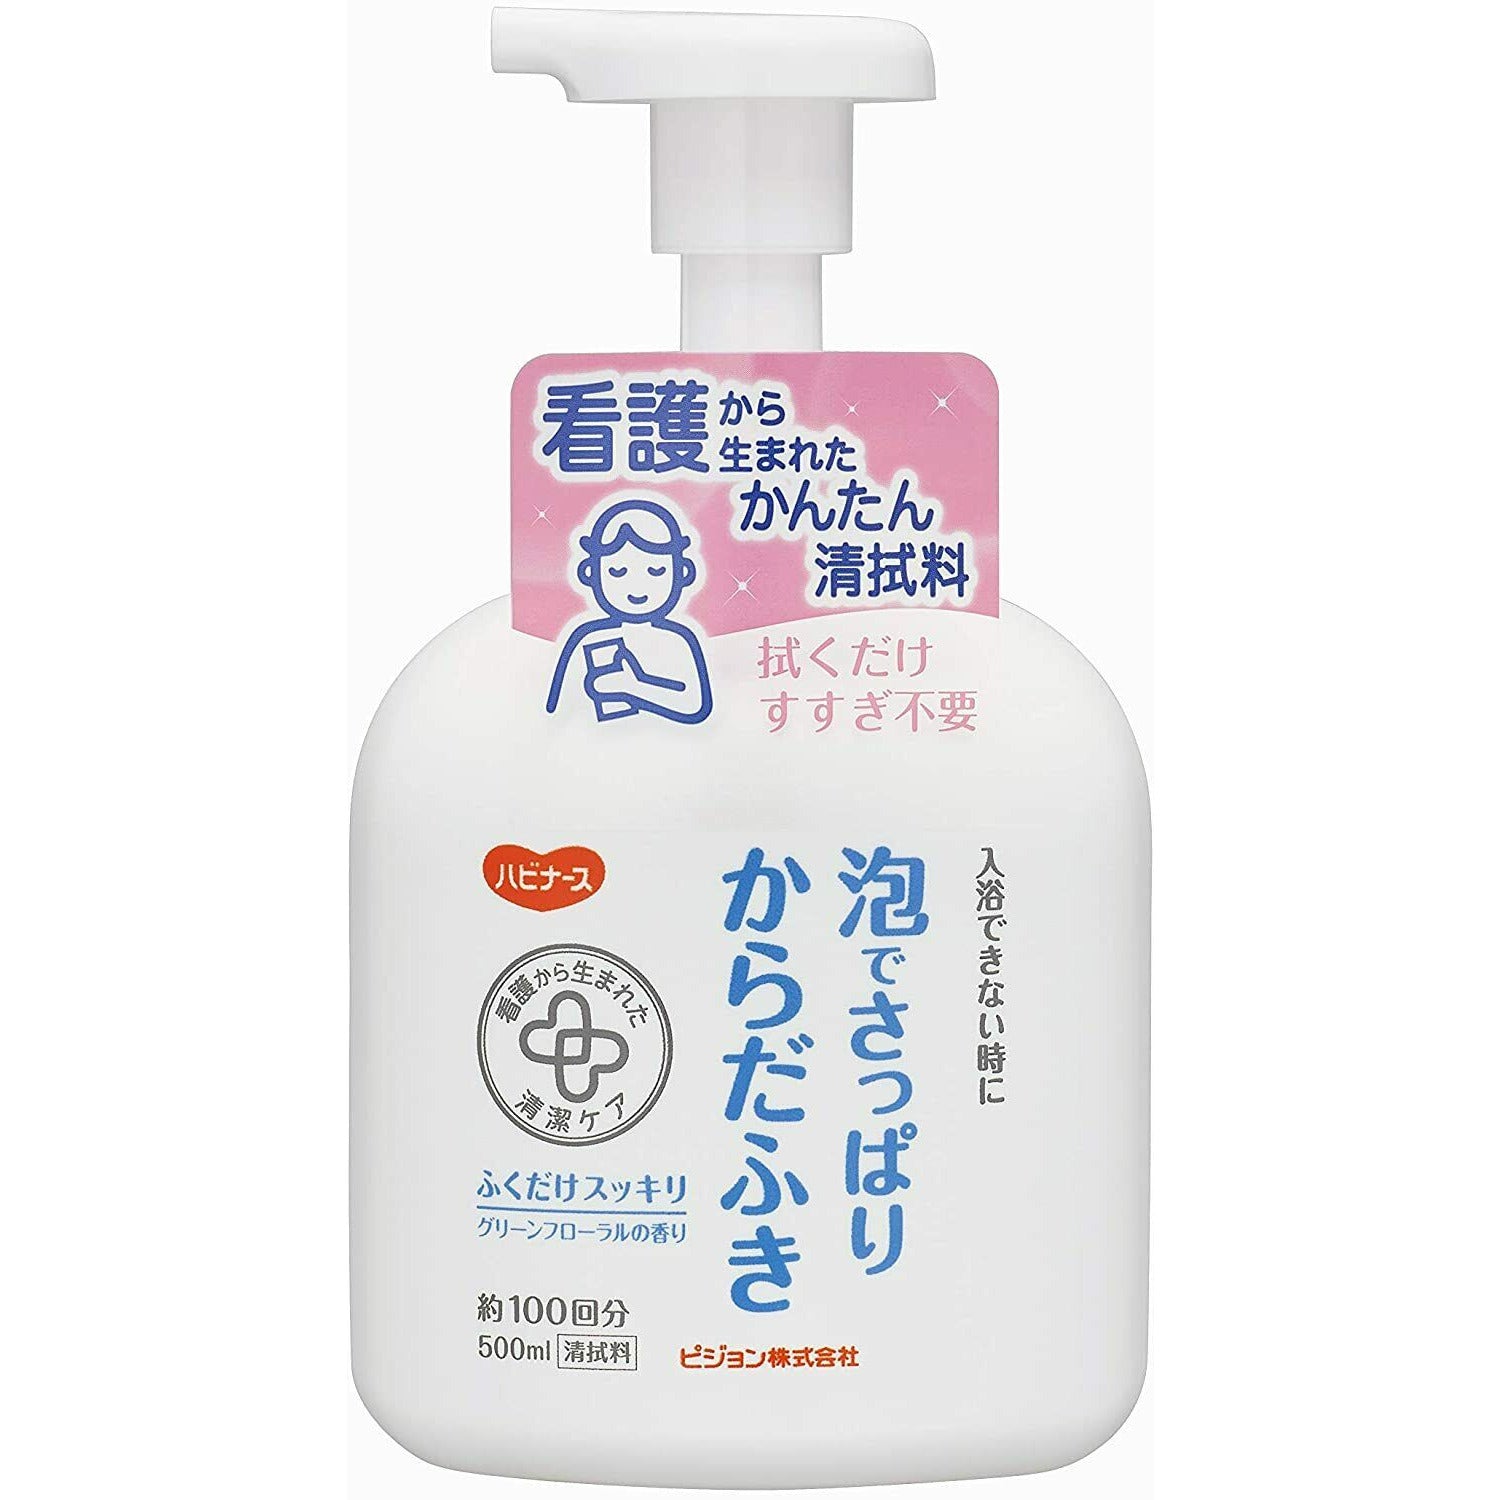 Pigeon Habiners Foam for a Refreshing Body Wipe 500ml Long-term care